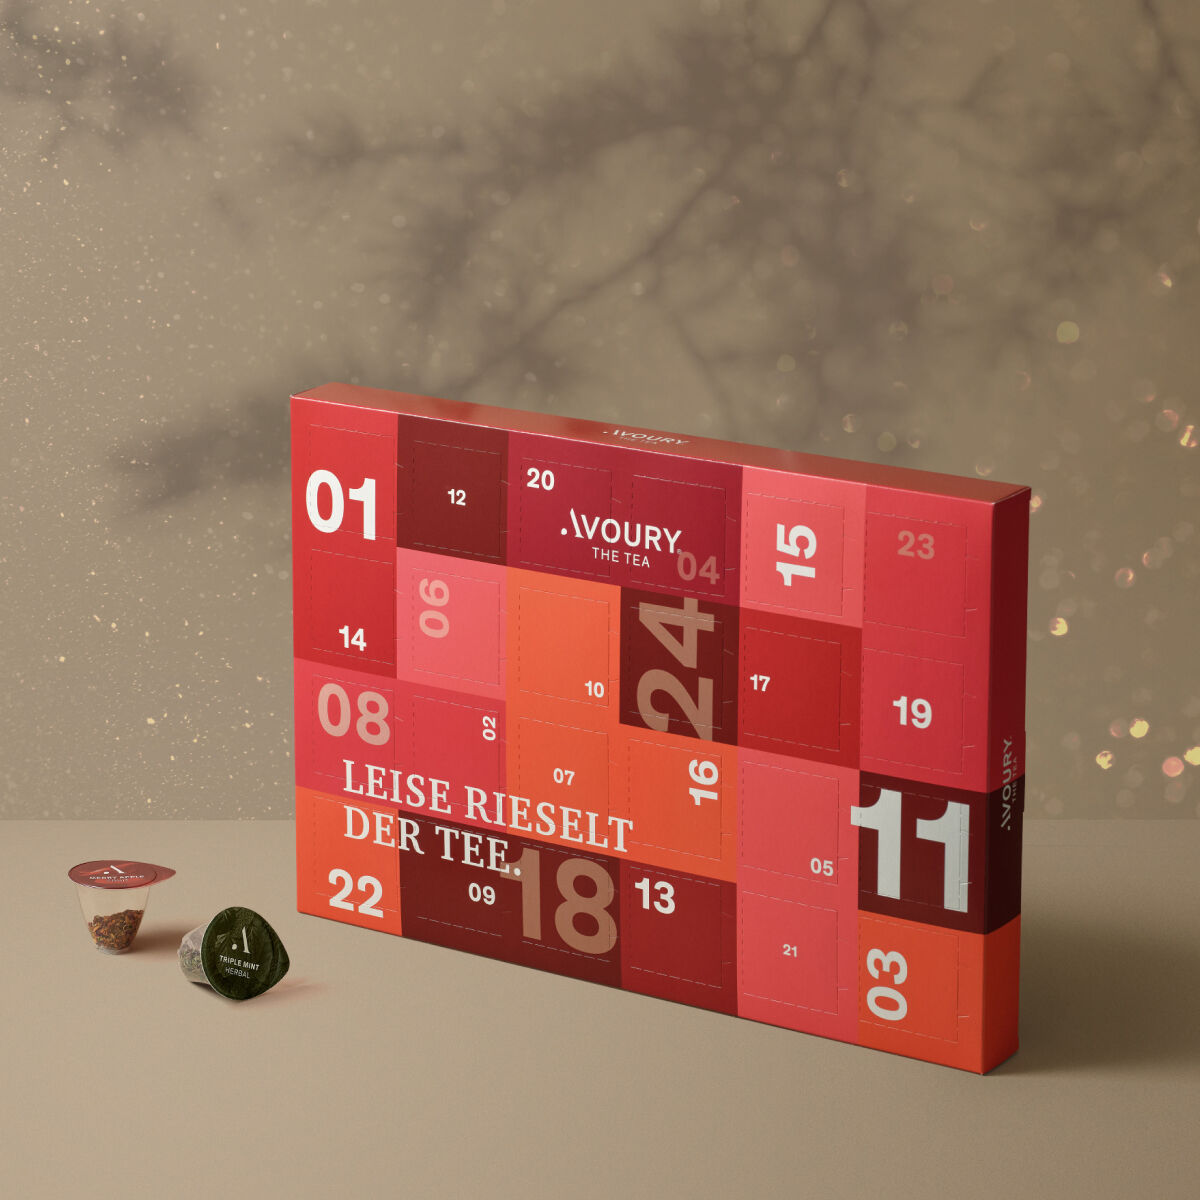 advent calendar with 24 doors designed in different shades of coulorful red in a retangular  box